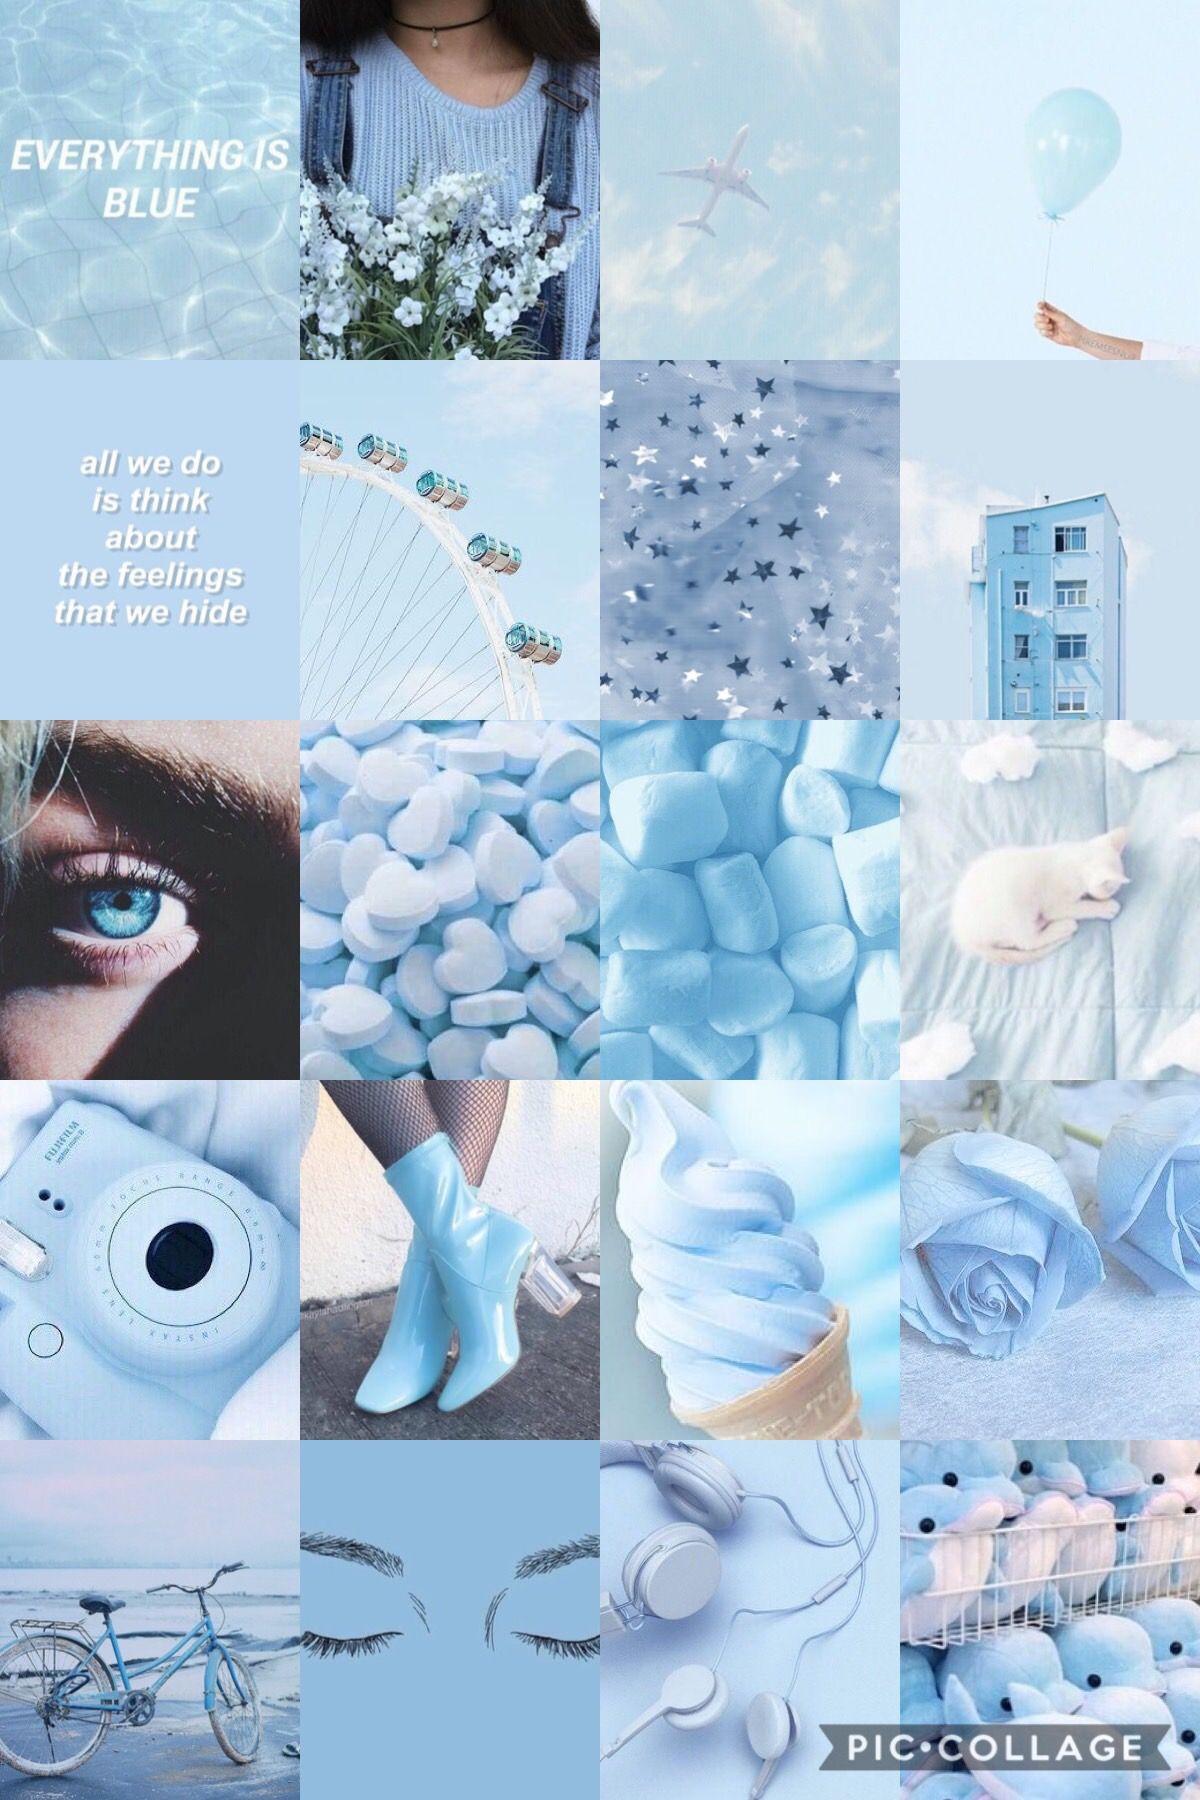 A collage of different pictures with blue backgrounds - Blue, light blue, pastel blue